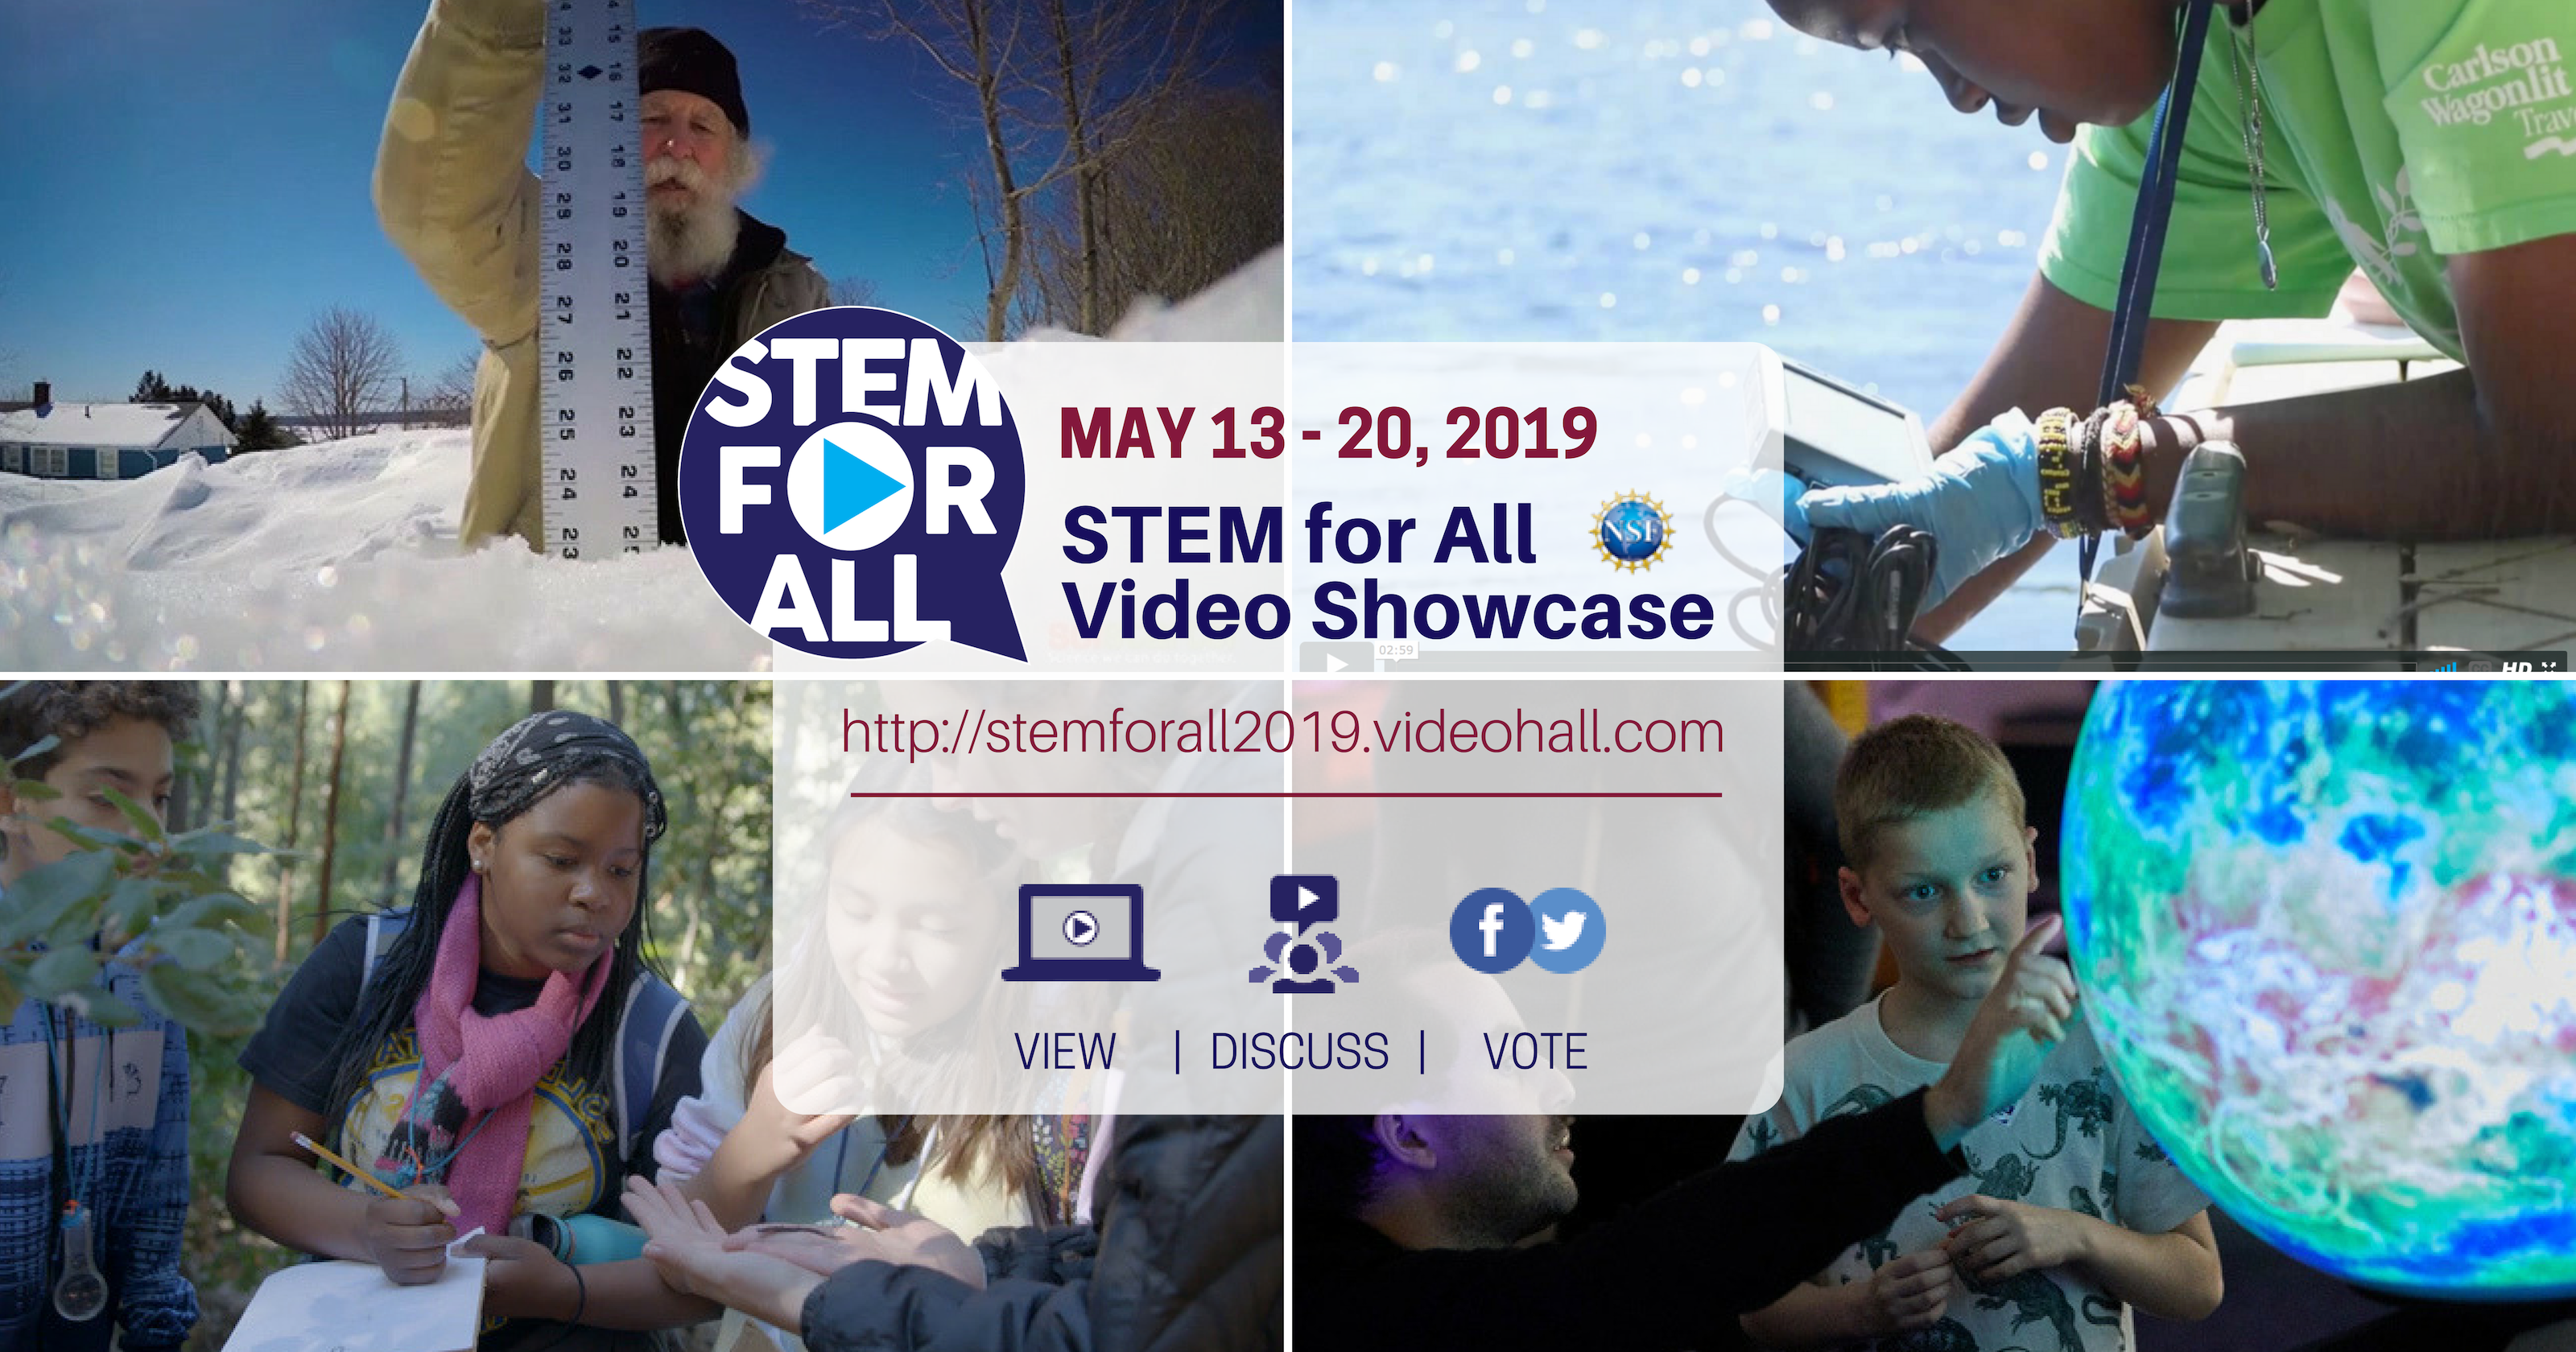 The STEM for All Video Showcase Announces 2019 Dates